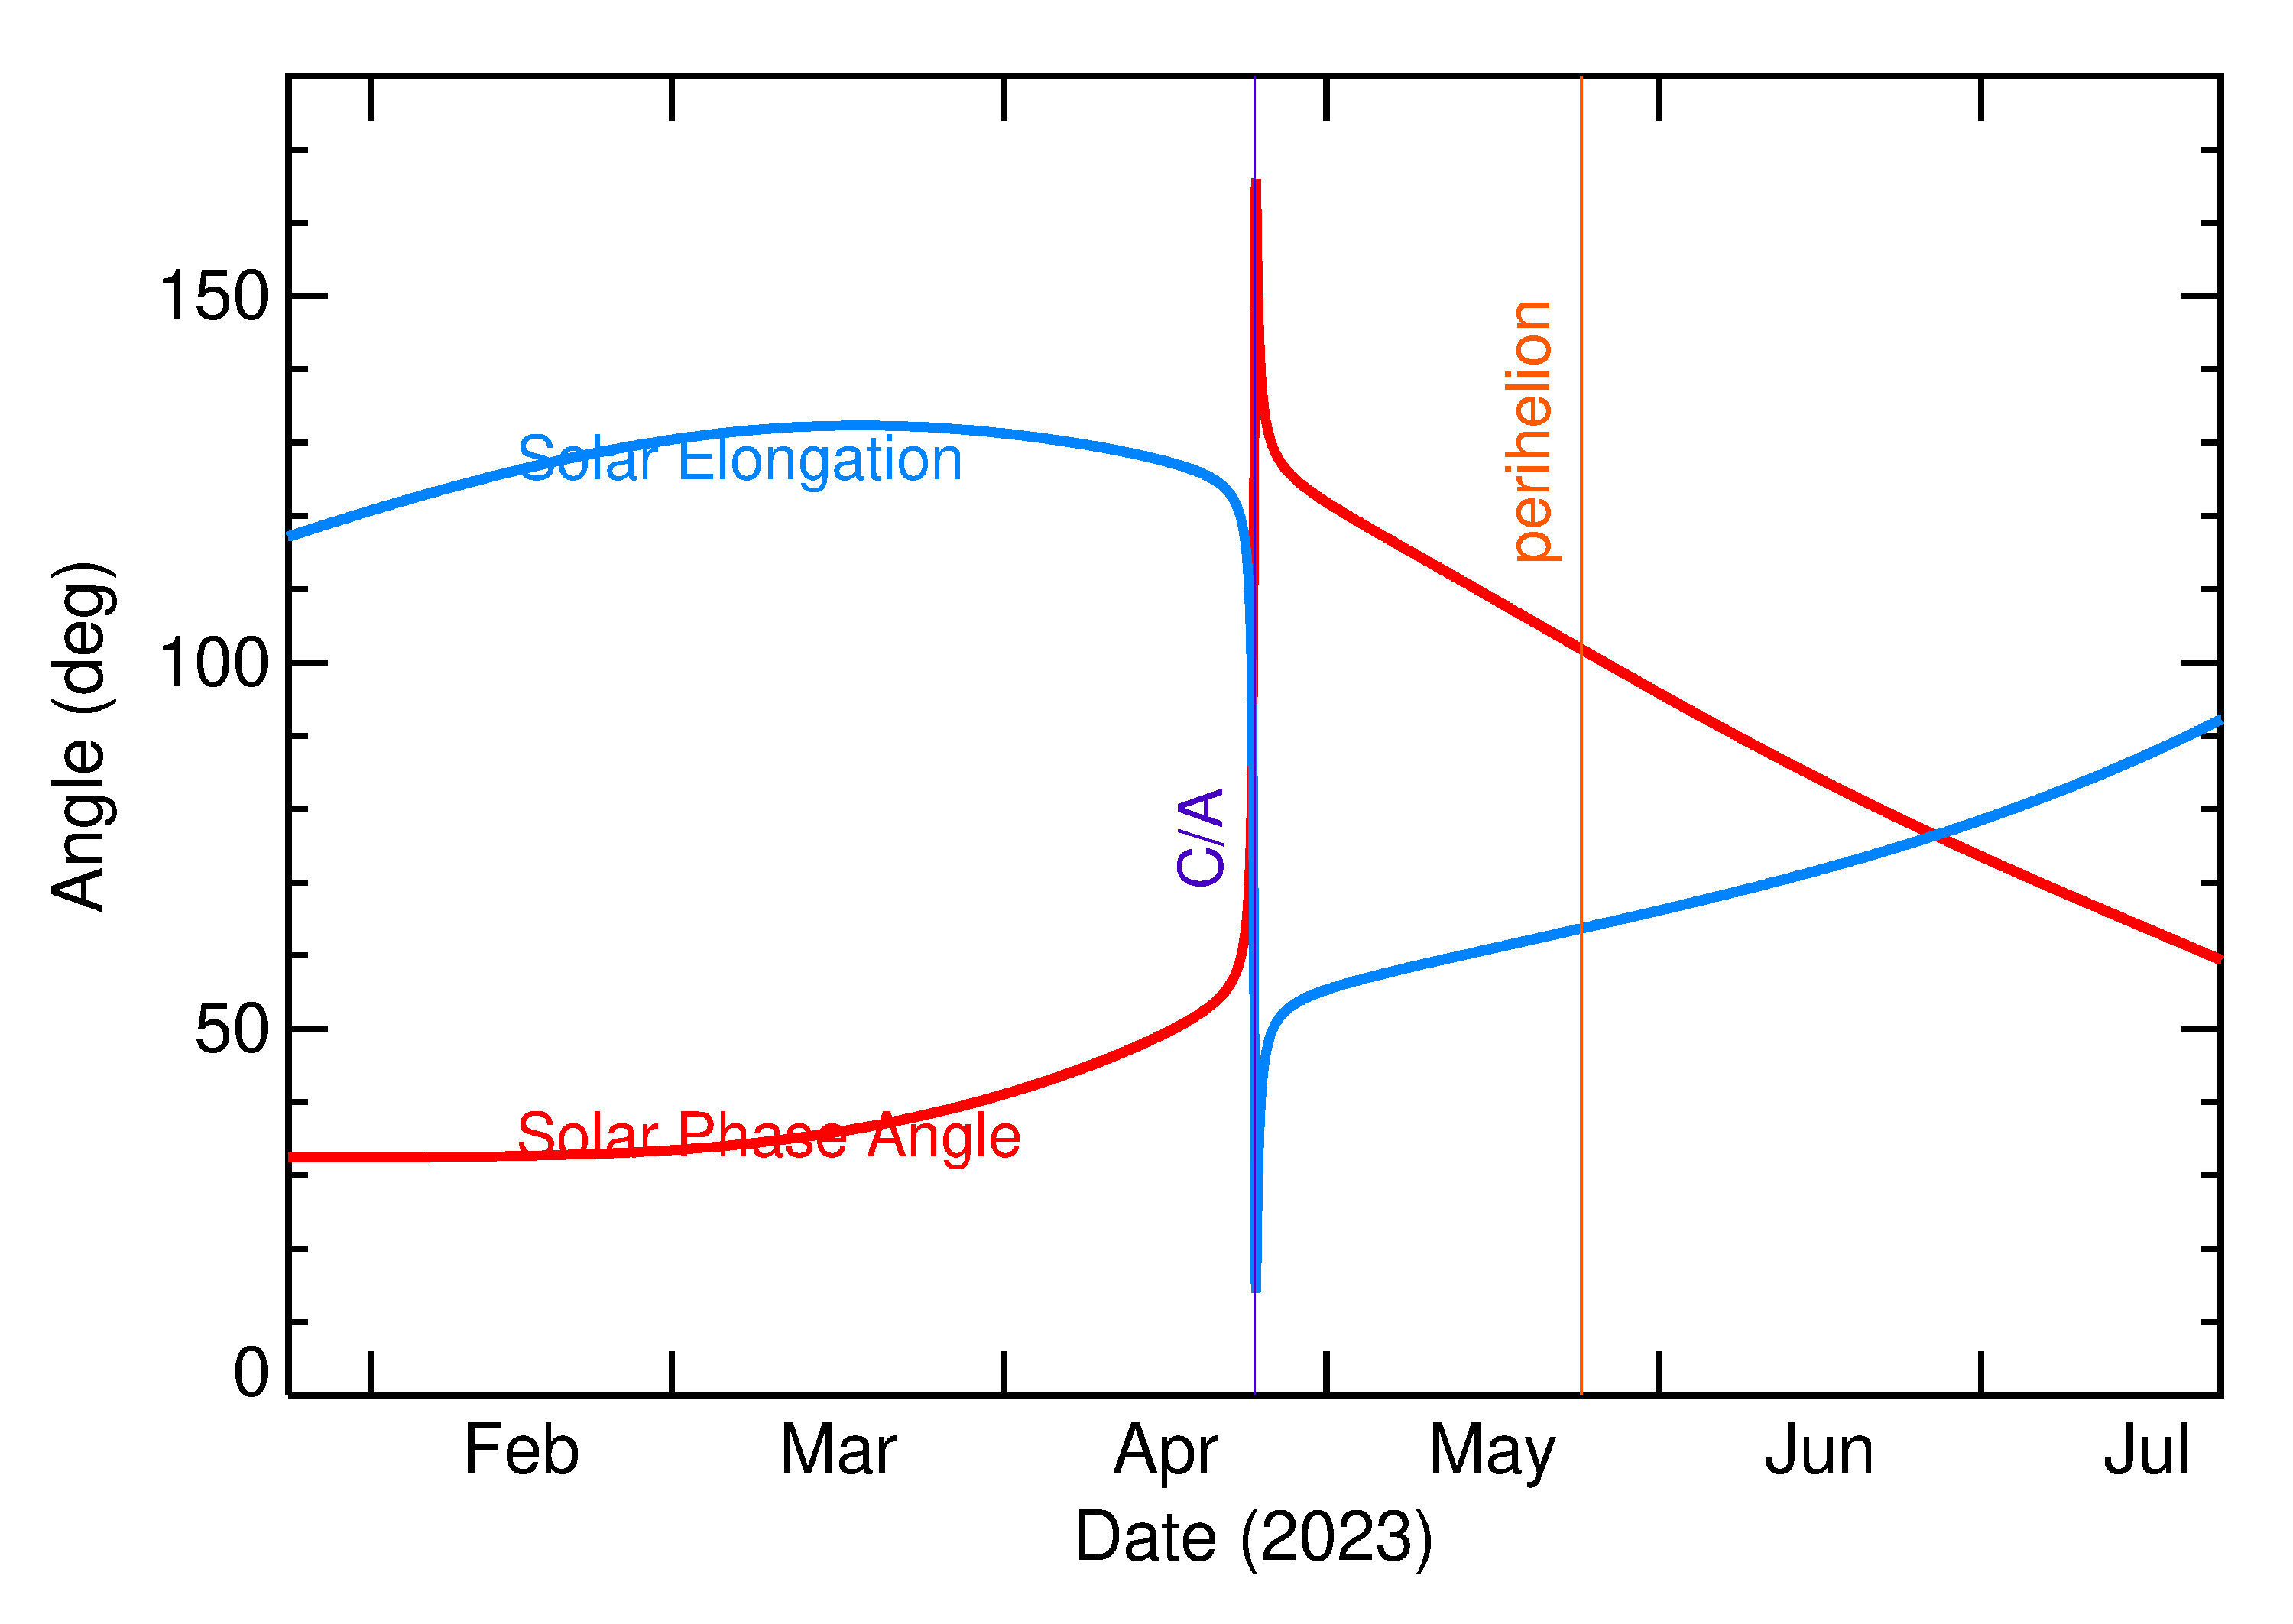 Solar Elongation and Solar Phase Angle of 2023 HW3 in the months around closest approach